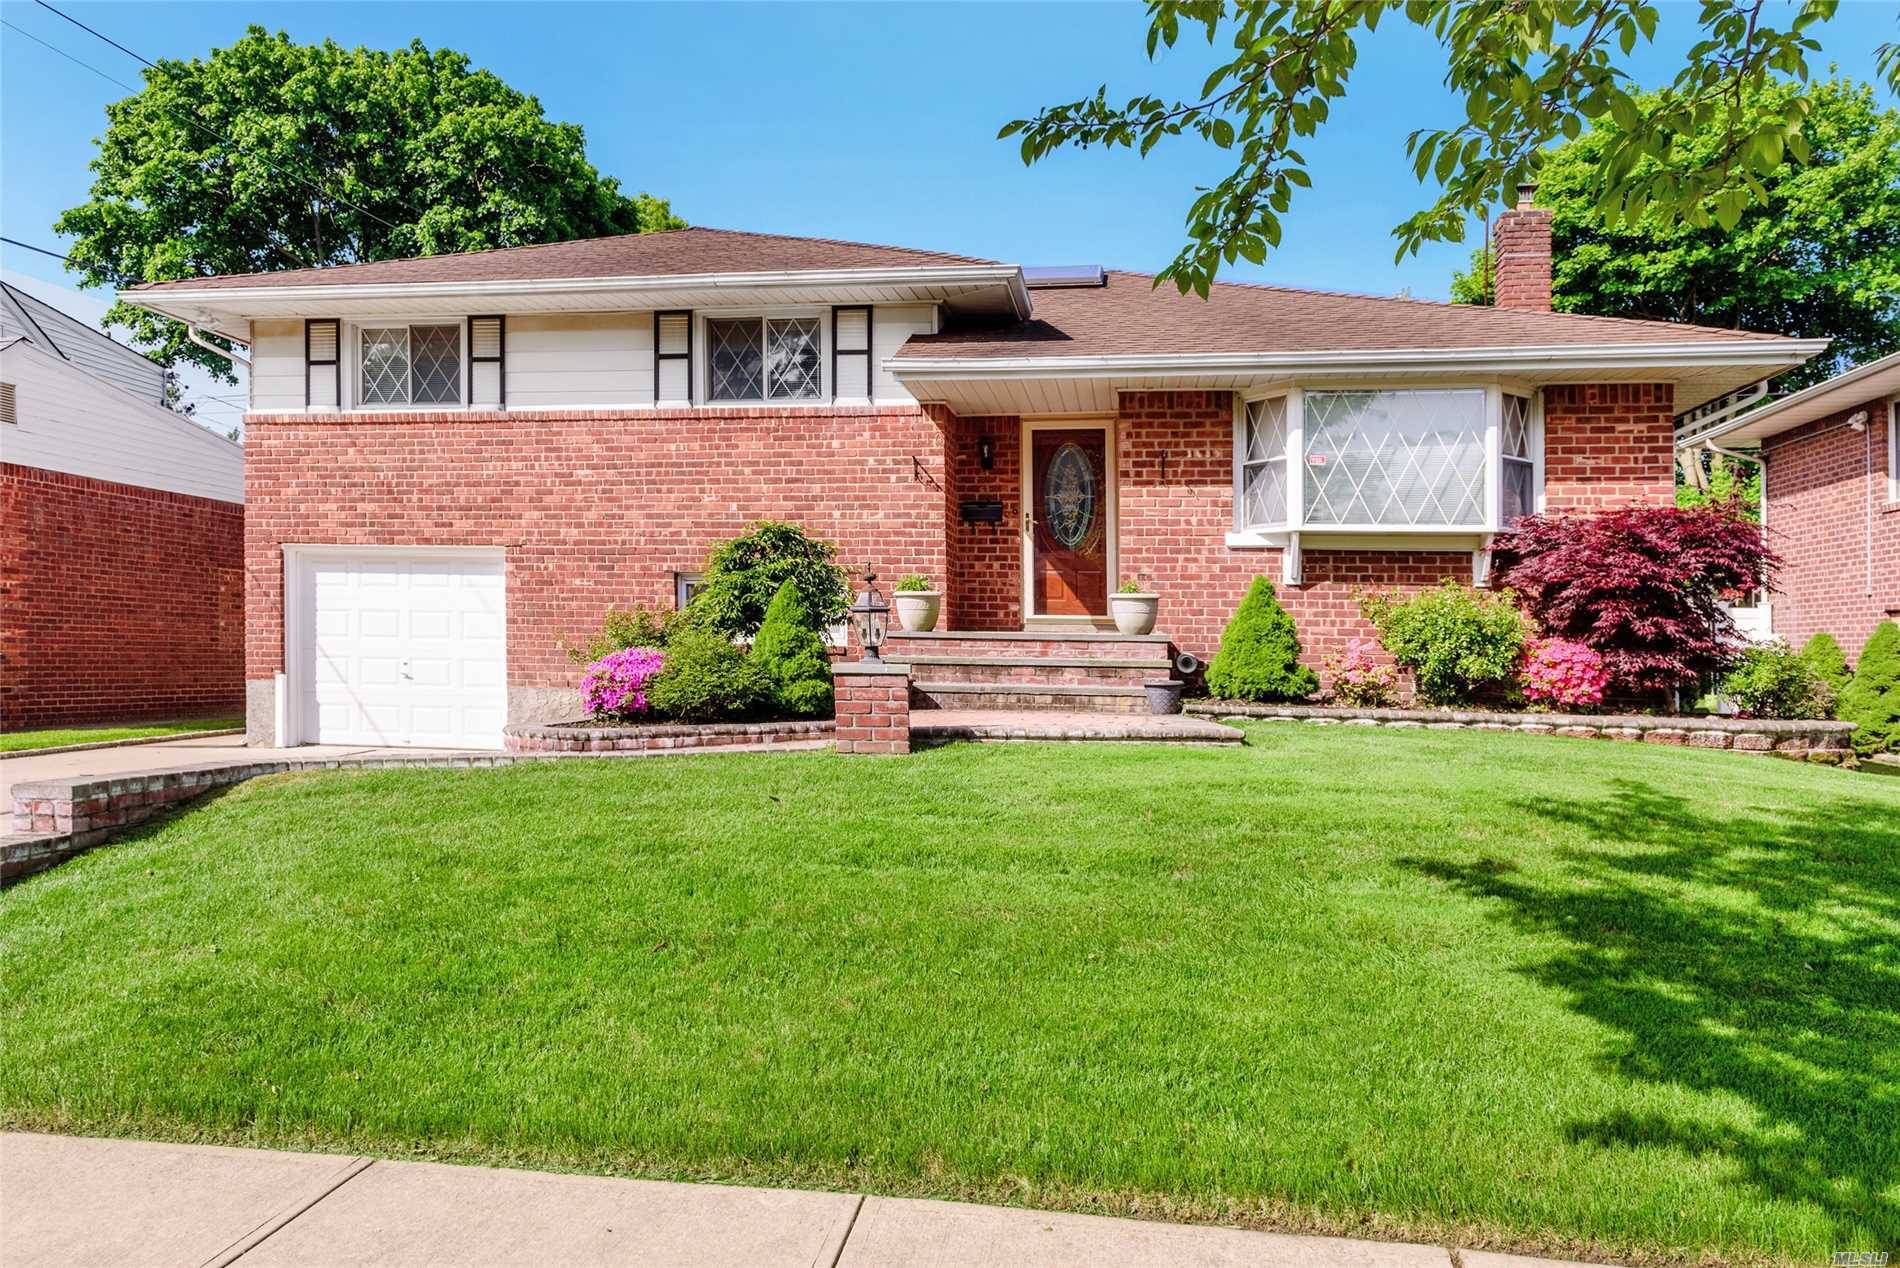 This Spacious Renovated Large 4 Level Split Brick Home Features 4 Bedrooms and 3 Baths, Marble Entry Foyer, Updated Kitchen With Gas Cooking, Skylight, New Bath, Cedar Closet, Lovey and ...